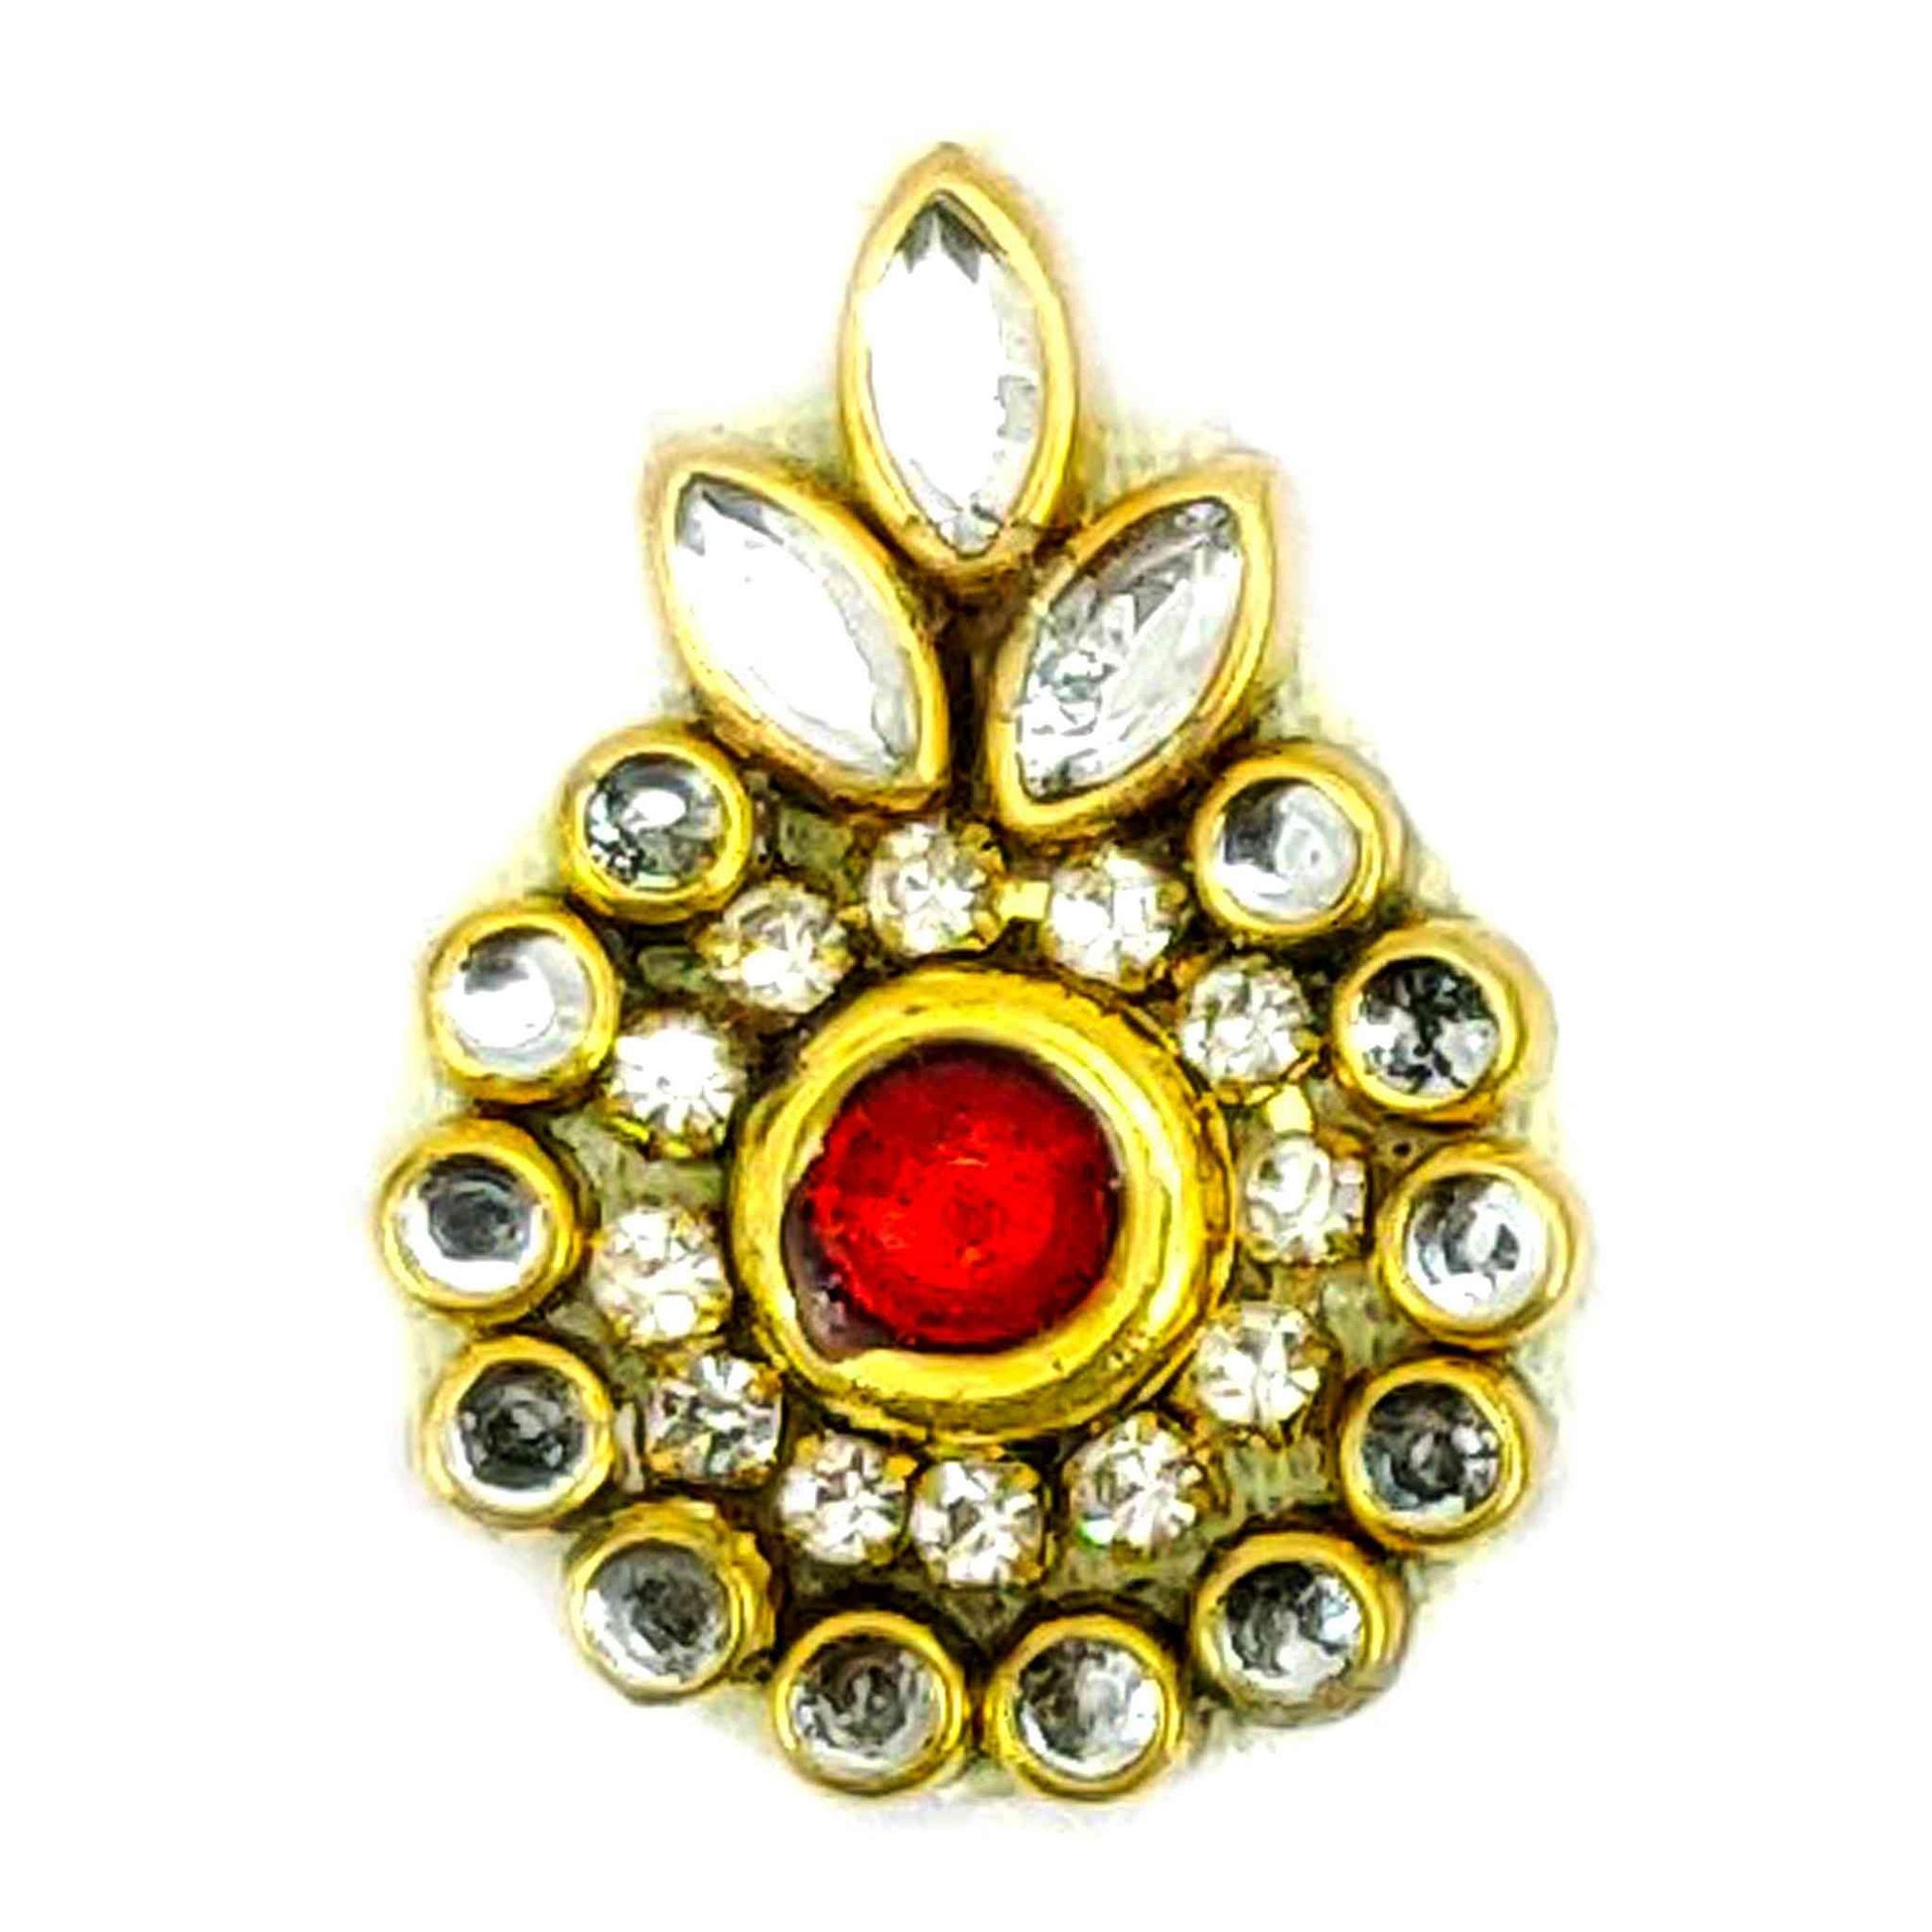 Rhinestones stuuded Tilak Buti for DIY Craft, Trousseau Packing or Decoration (Bunch of 12) - Design 243, Red - Indian Petals